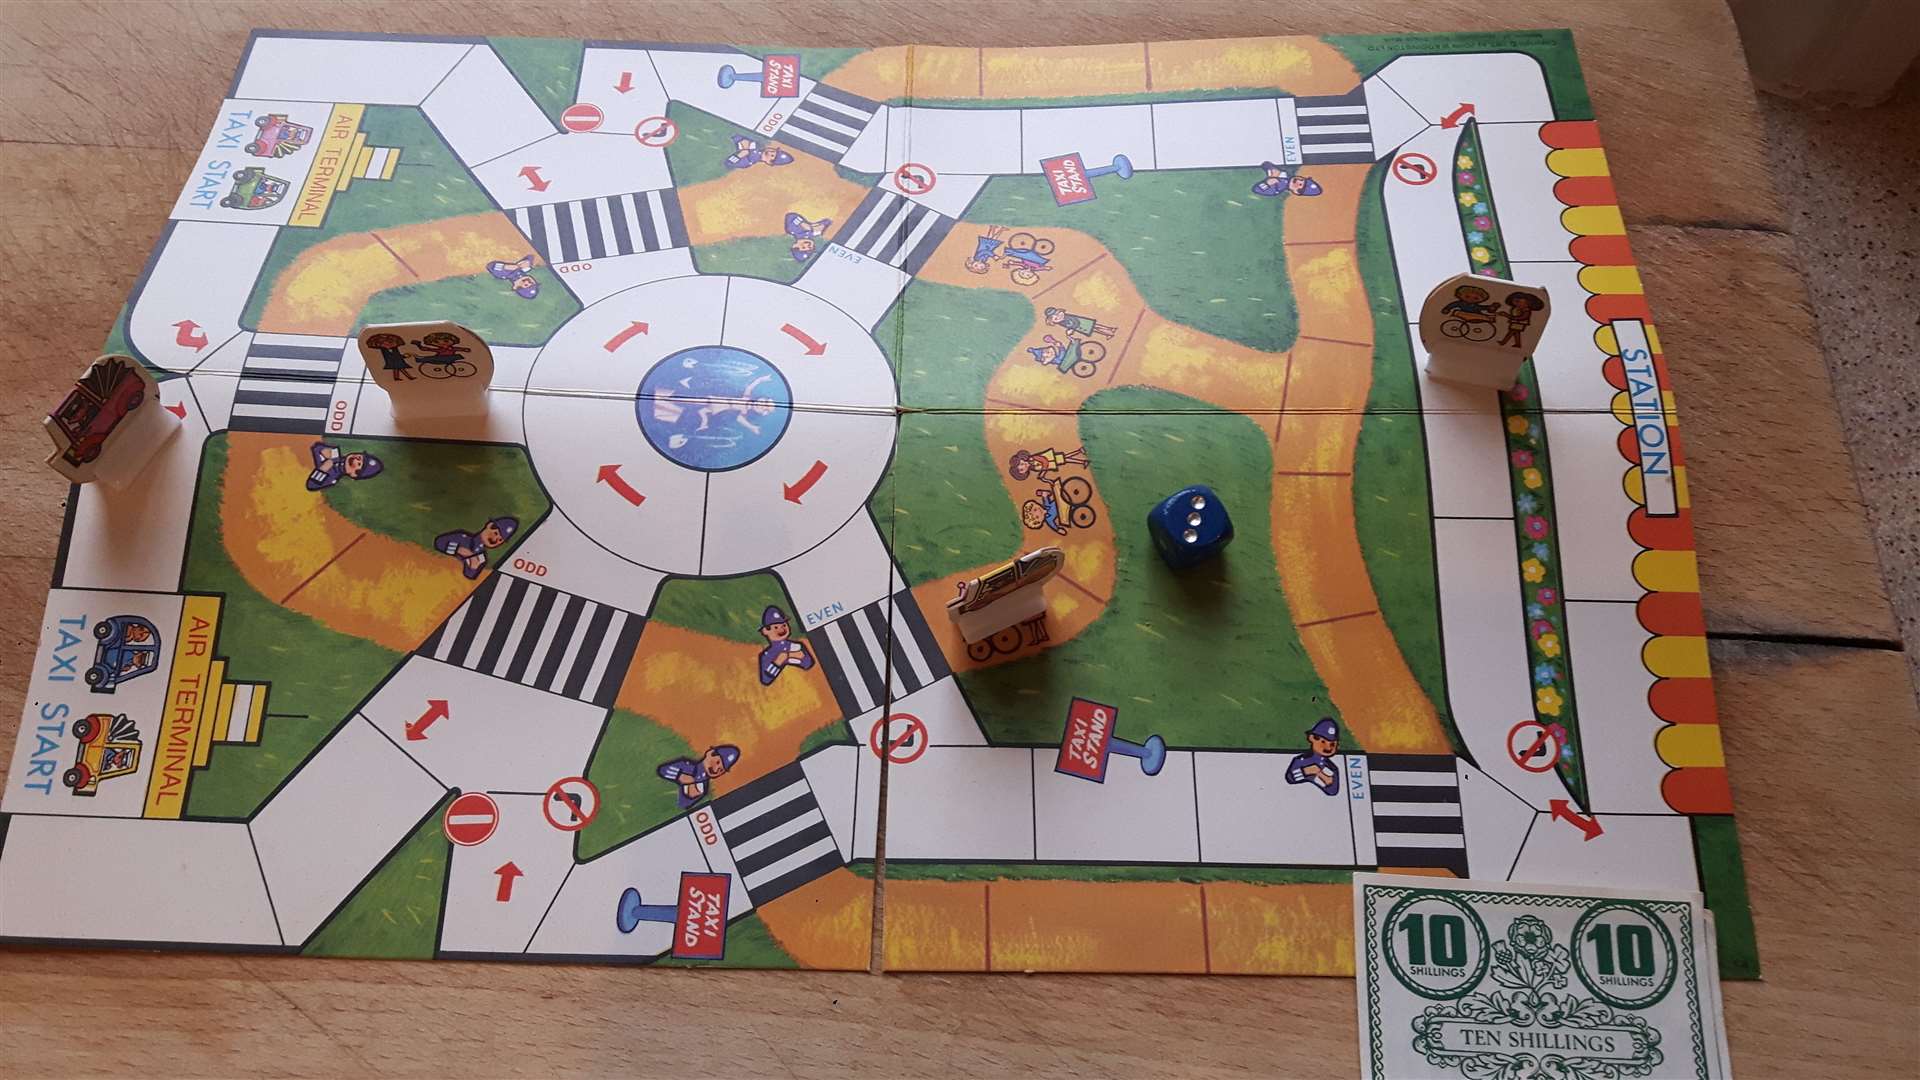 Whooops! A crazy Waddingtons board game